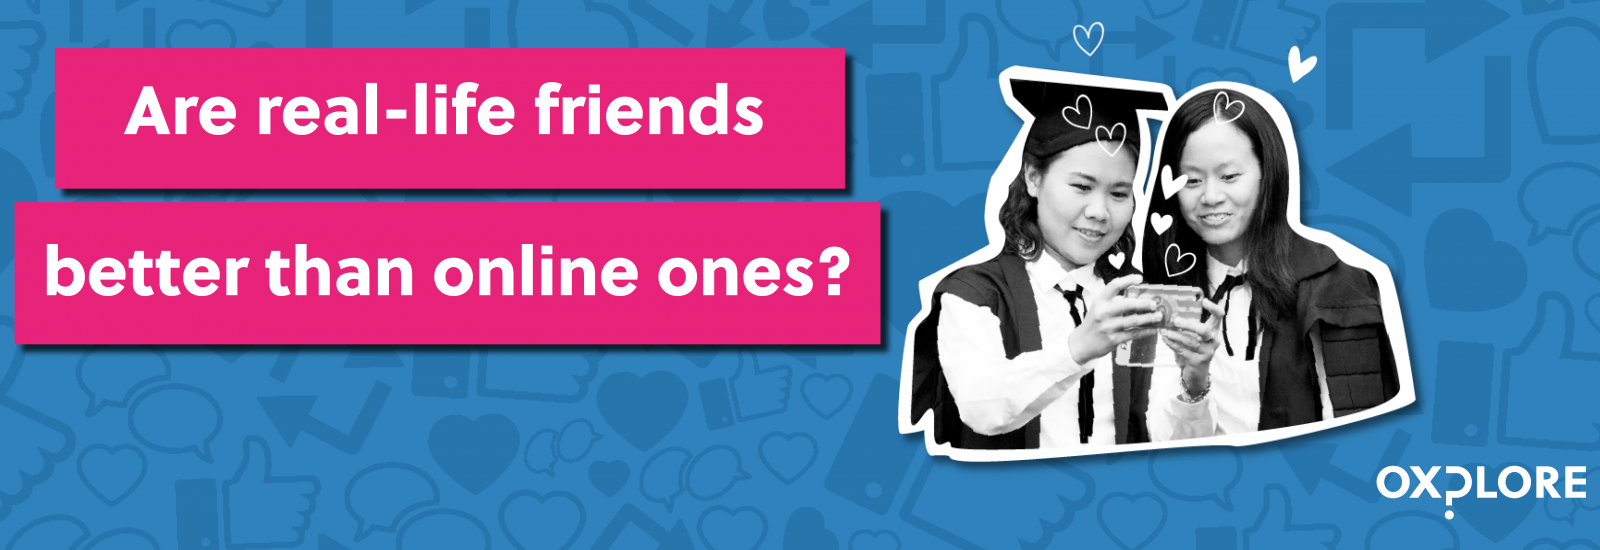 Are real friends better than online ones?